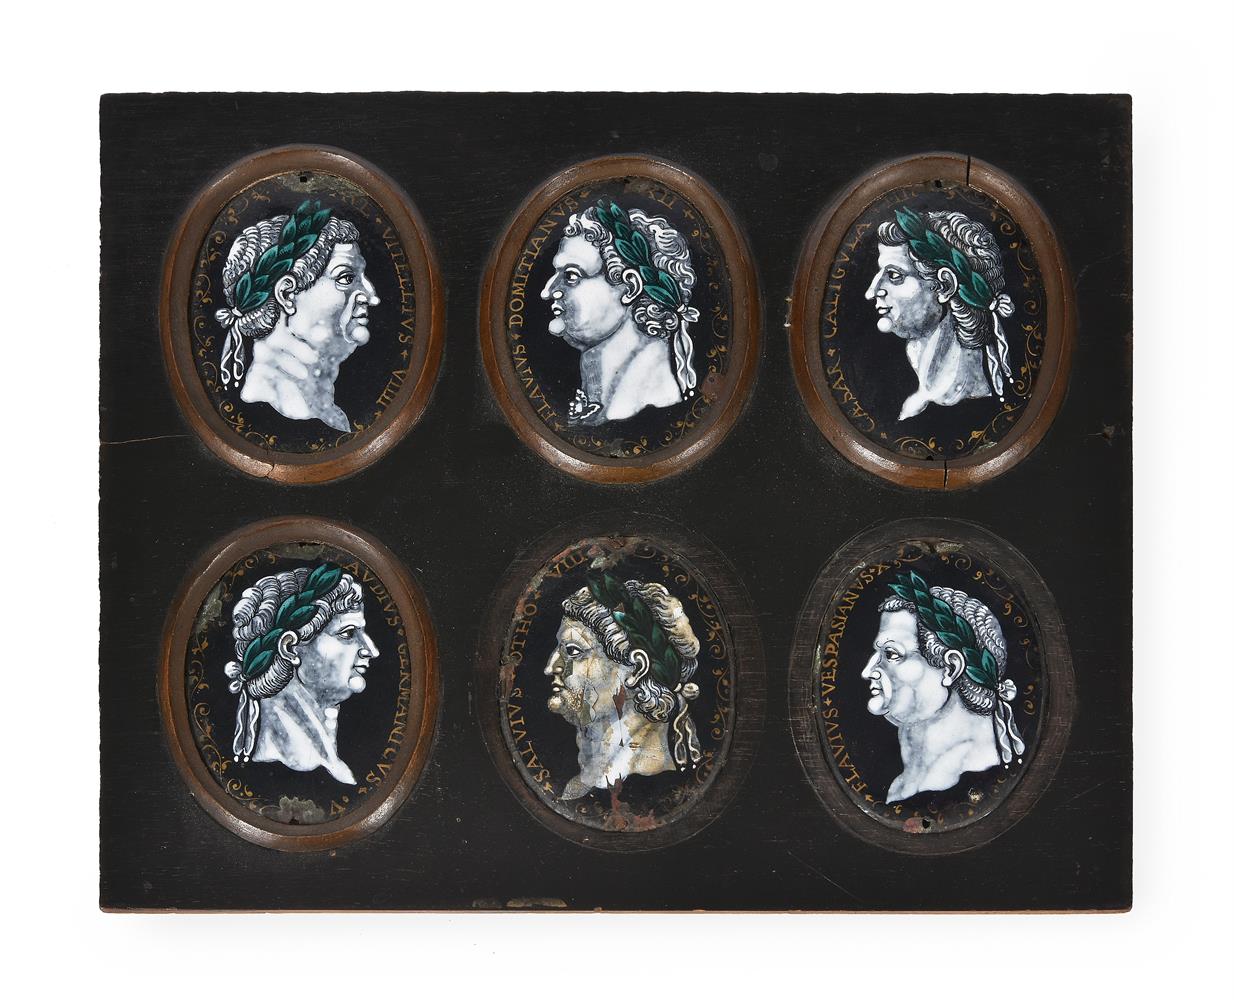 A GROUP OF SIX LIMOGES ENAMELS ON COPPER OF ROMAN EMPERORS, PROBABLY 17TH CENTURY